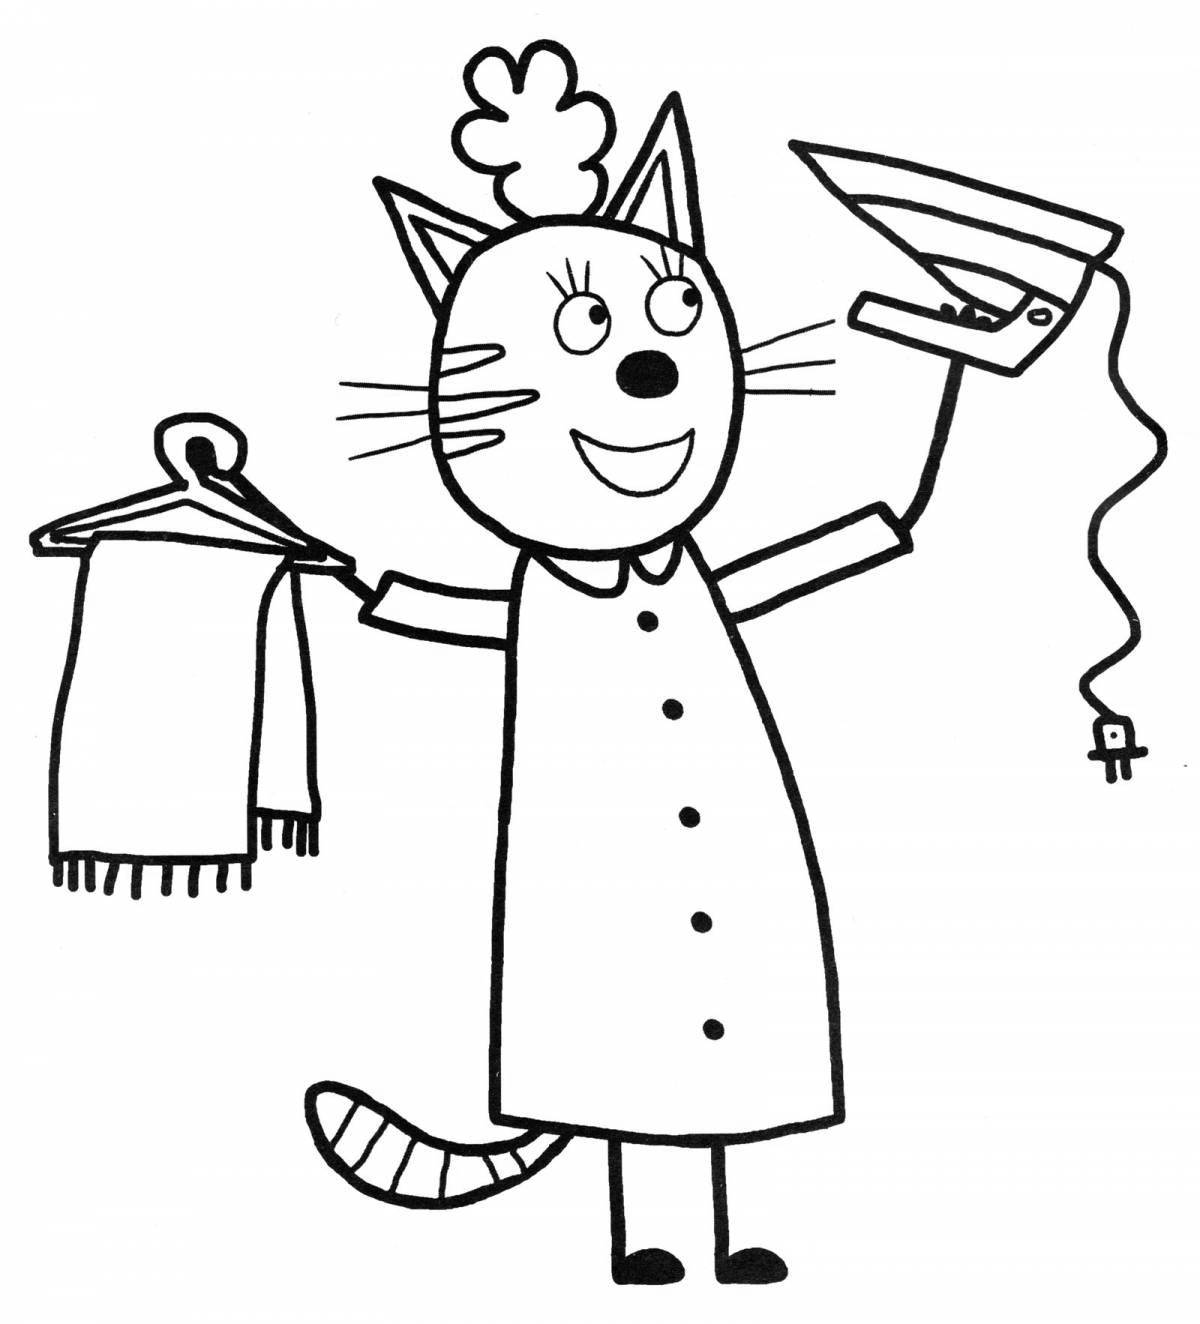 Three cats holiday coloring book for kids